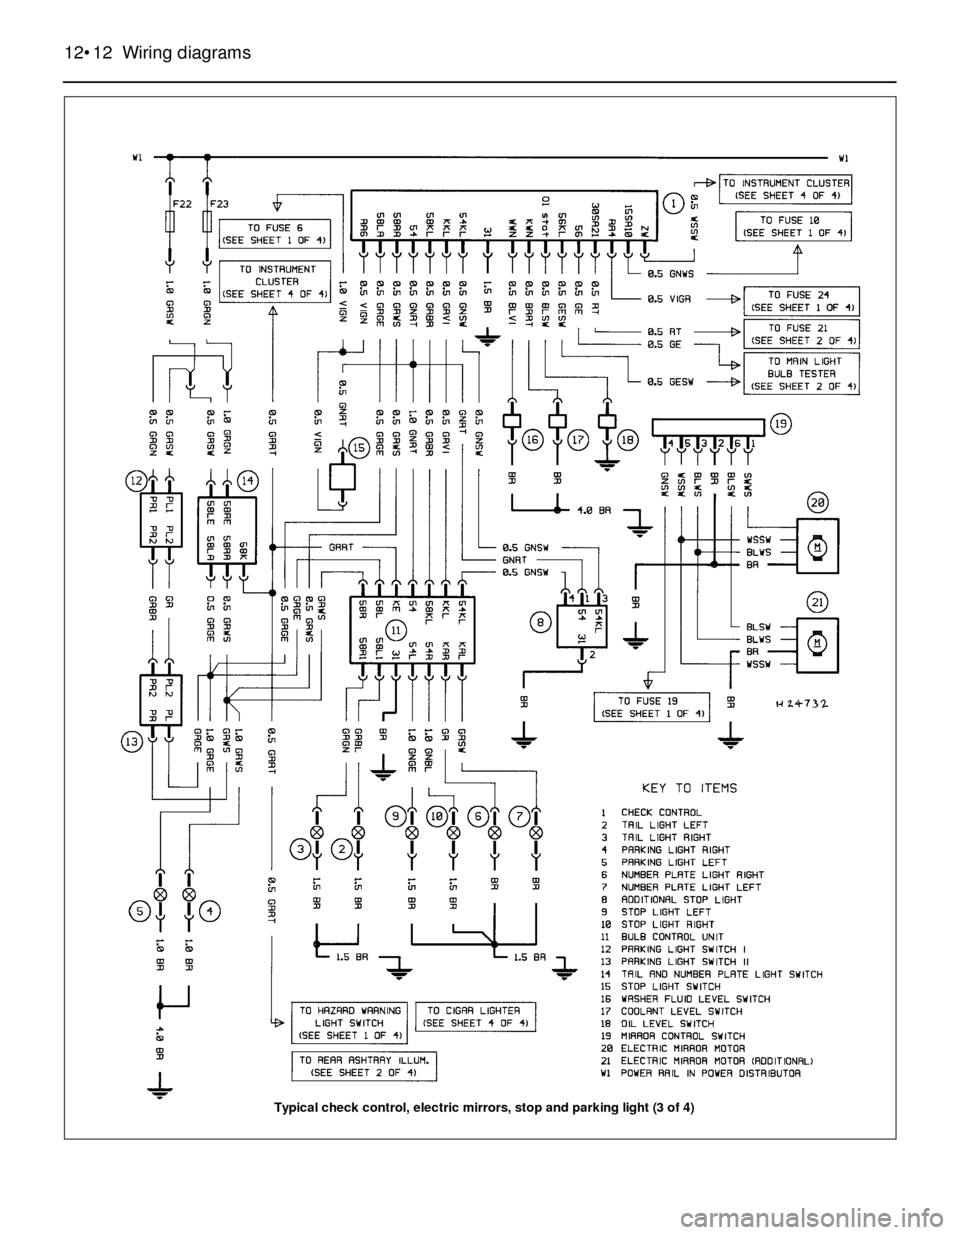 BMW 3 SERIES 1986 E30 Workshop Manual 12•12 Wiring diagrams
Typical check control, electric mirrors, stop and parking light (3 of 4) 